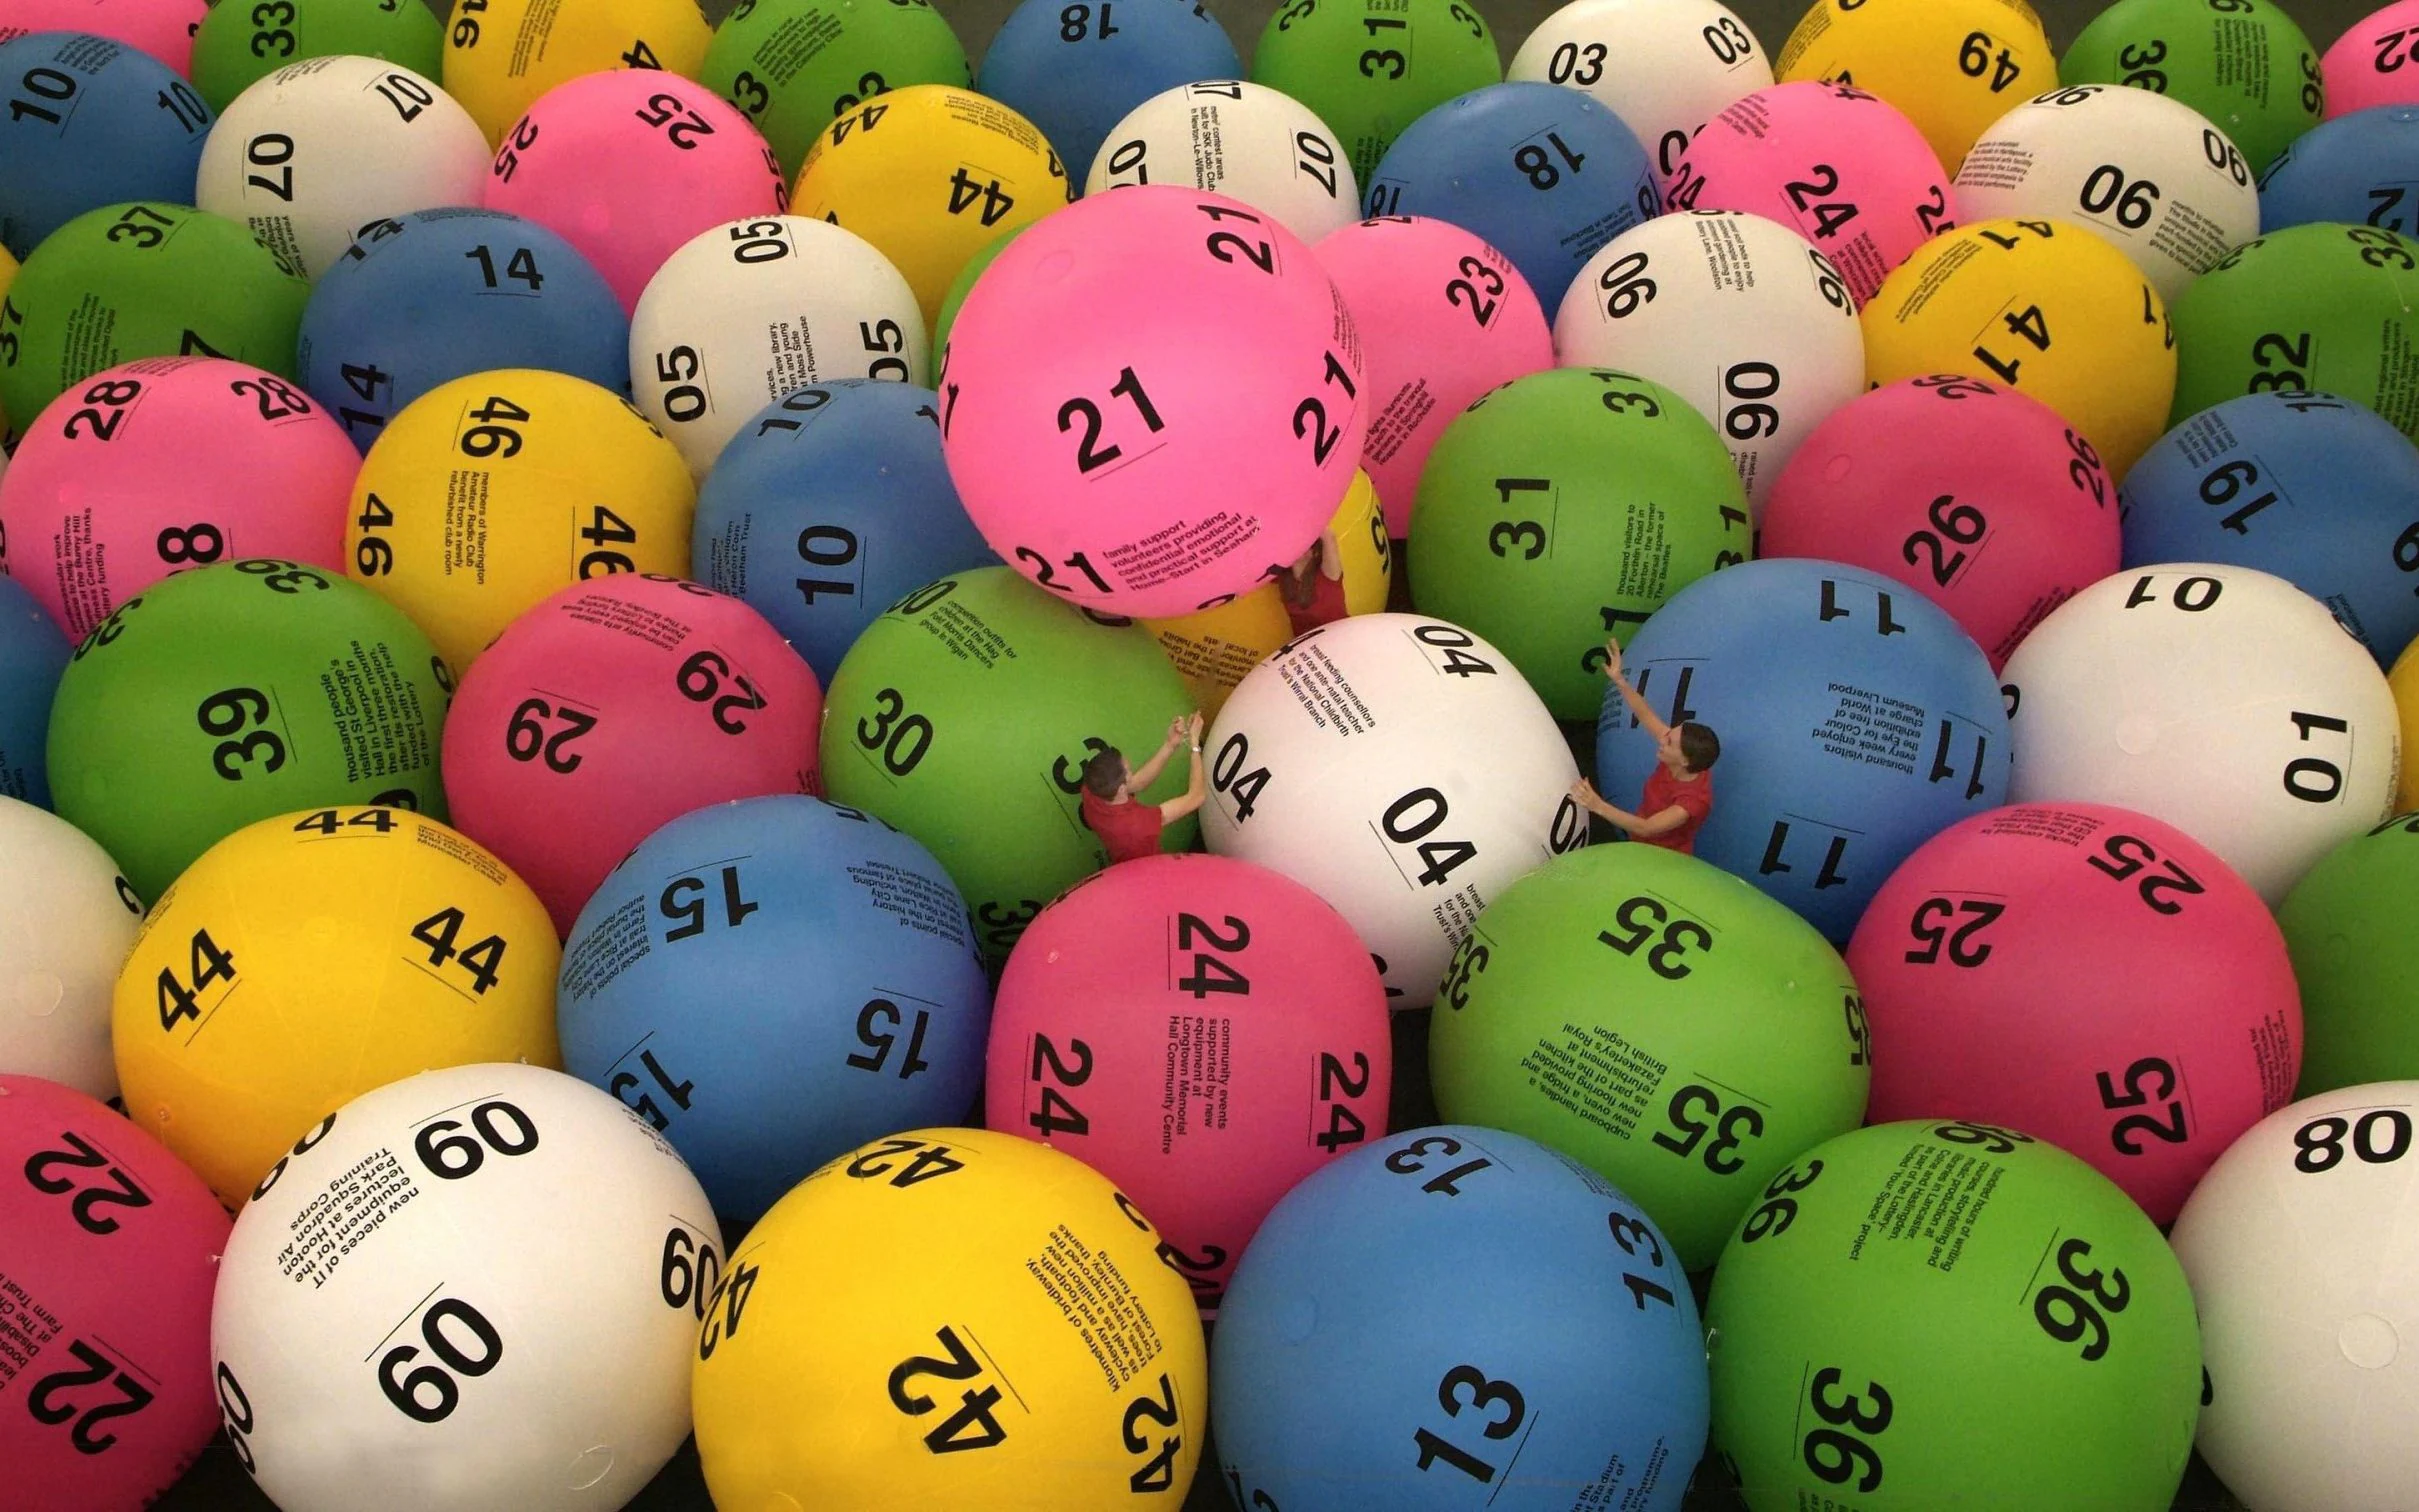 How to Pick Lottery Numbers – Is There a Strategy?